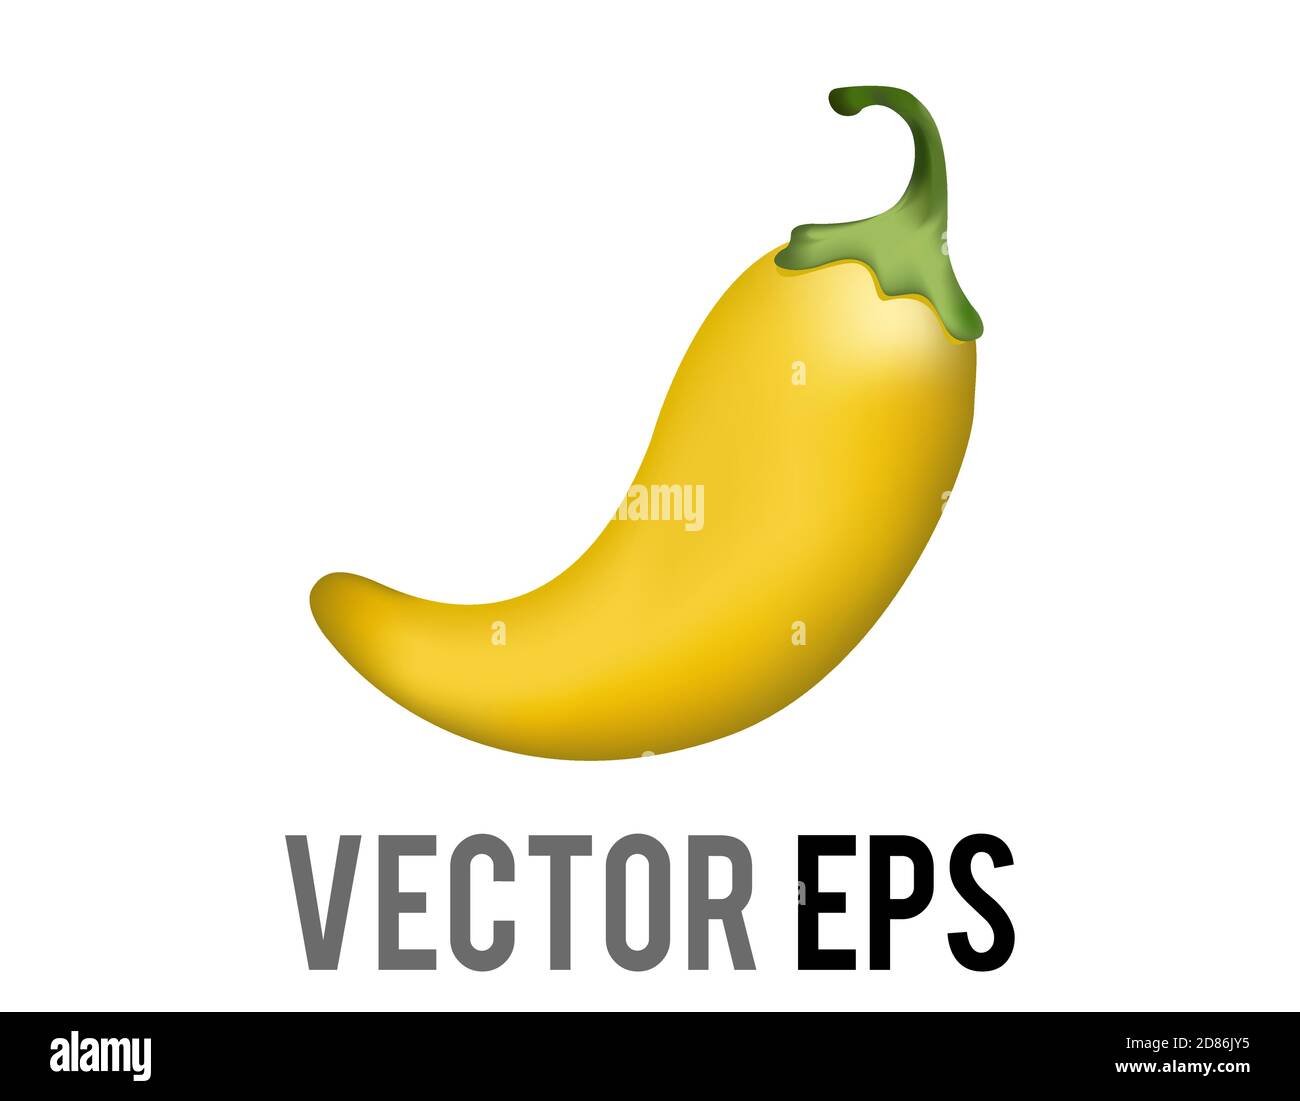 The isolated vector yellow curled Mexican chili pepper icon with green stem, representing some foot hot and spicy Stock Vector